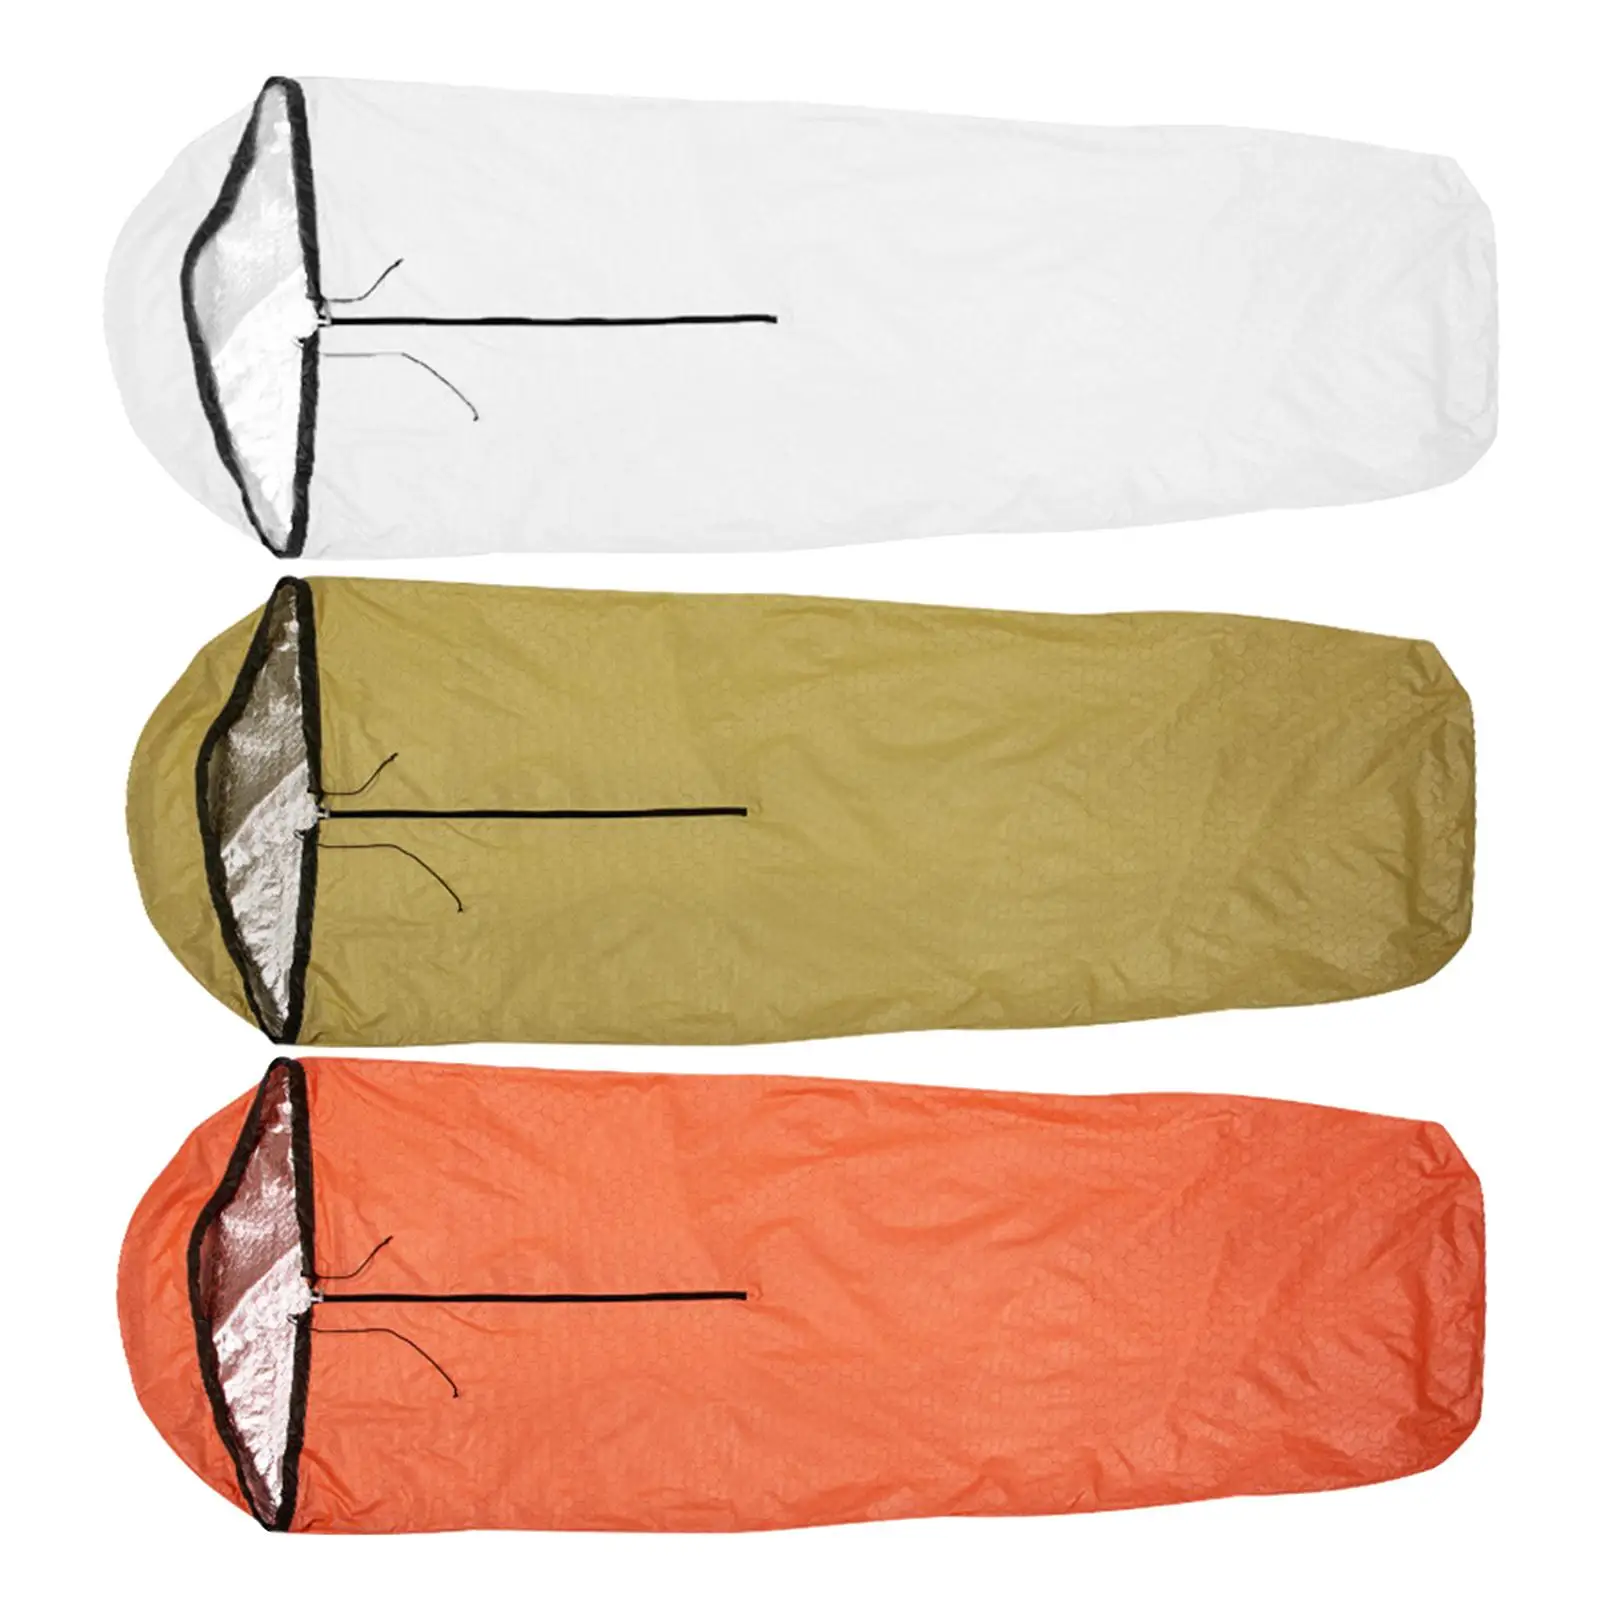 Emergency Sleeping Bag Nylon Cloth for Outdoor Survival Hiking Backpacking